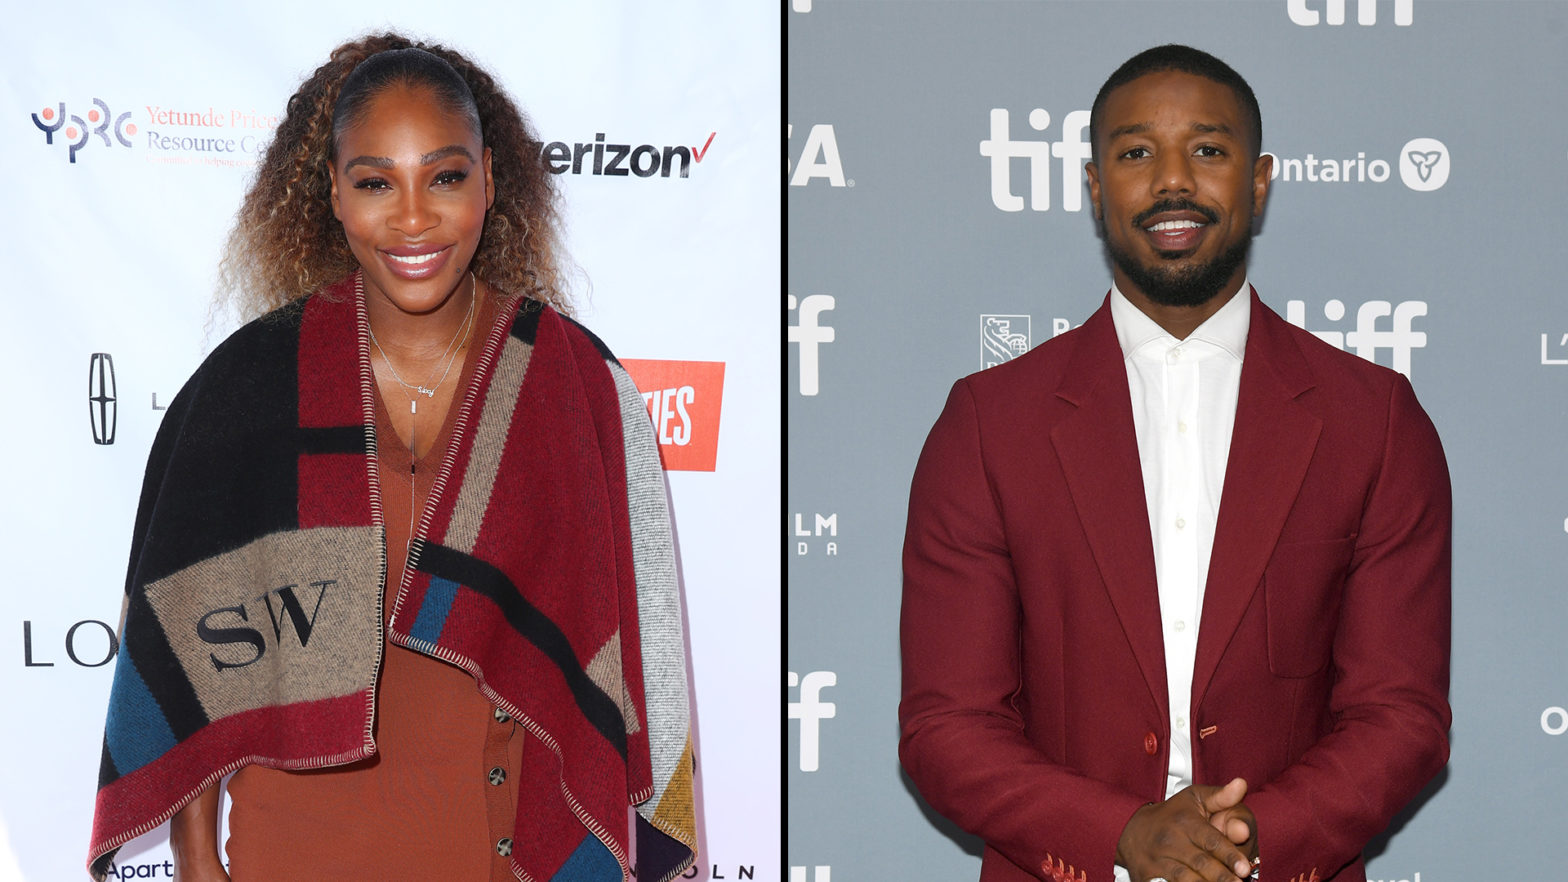 Michael B. Jordan, Serena Ventures, MaC Venture Capital Partner To Give HBCU-Bred Founders A Chance To Win $1M